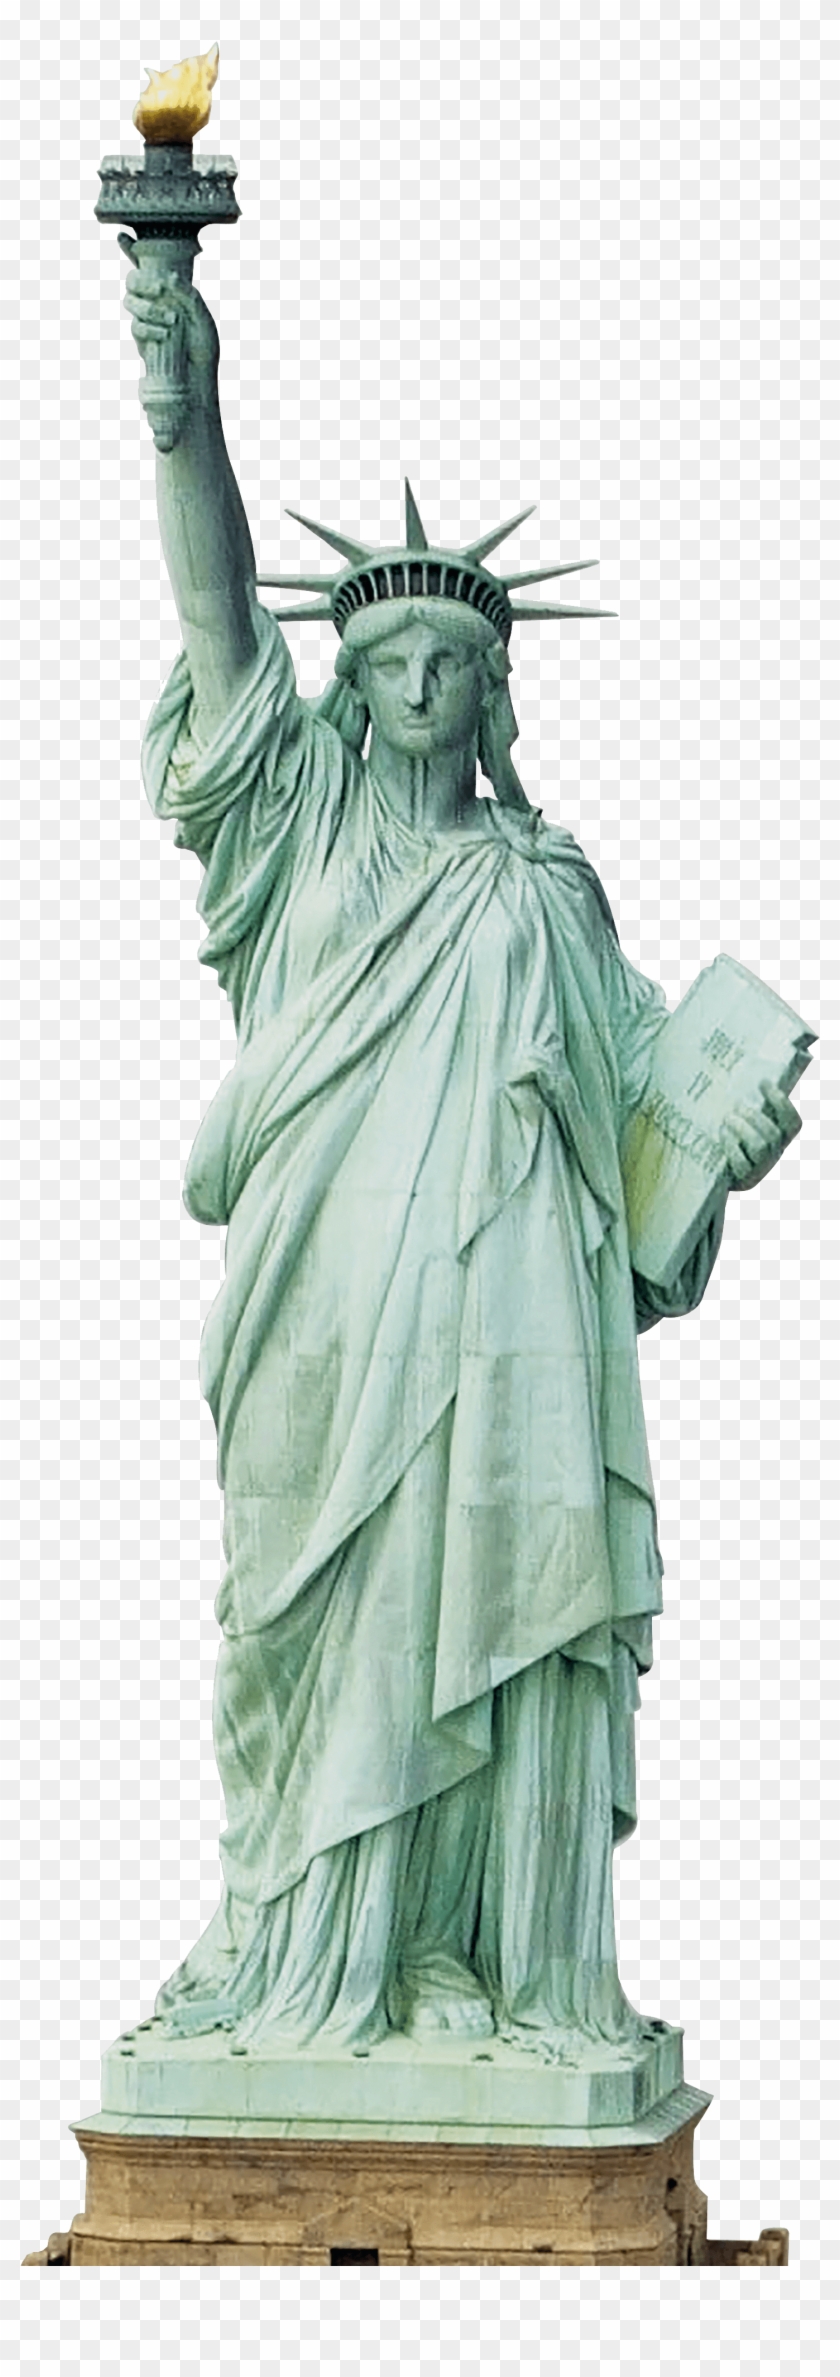 Statue Of Liberty Transparent Background - Statue Of Liberty Clipart #122505